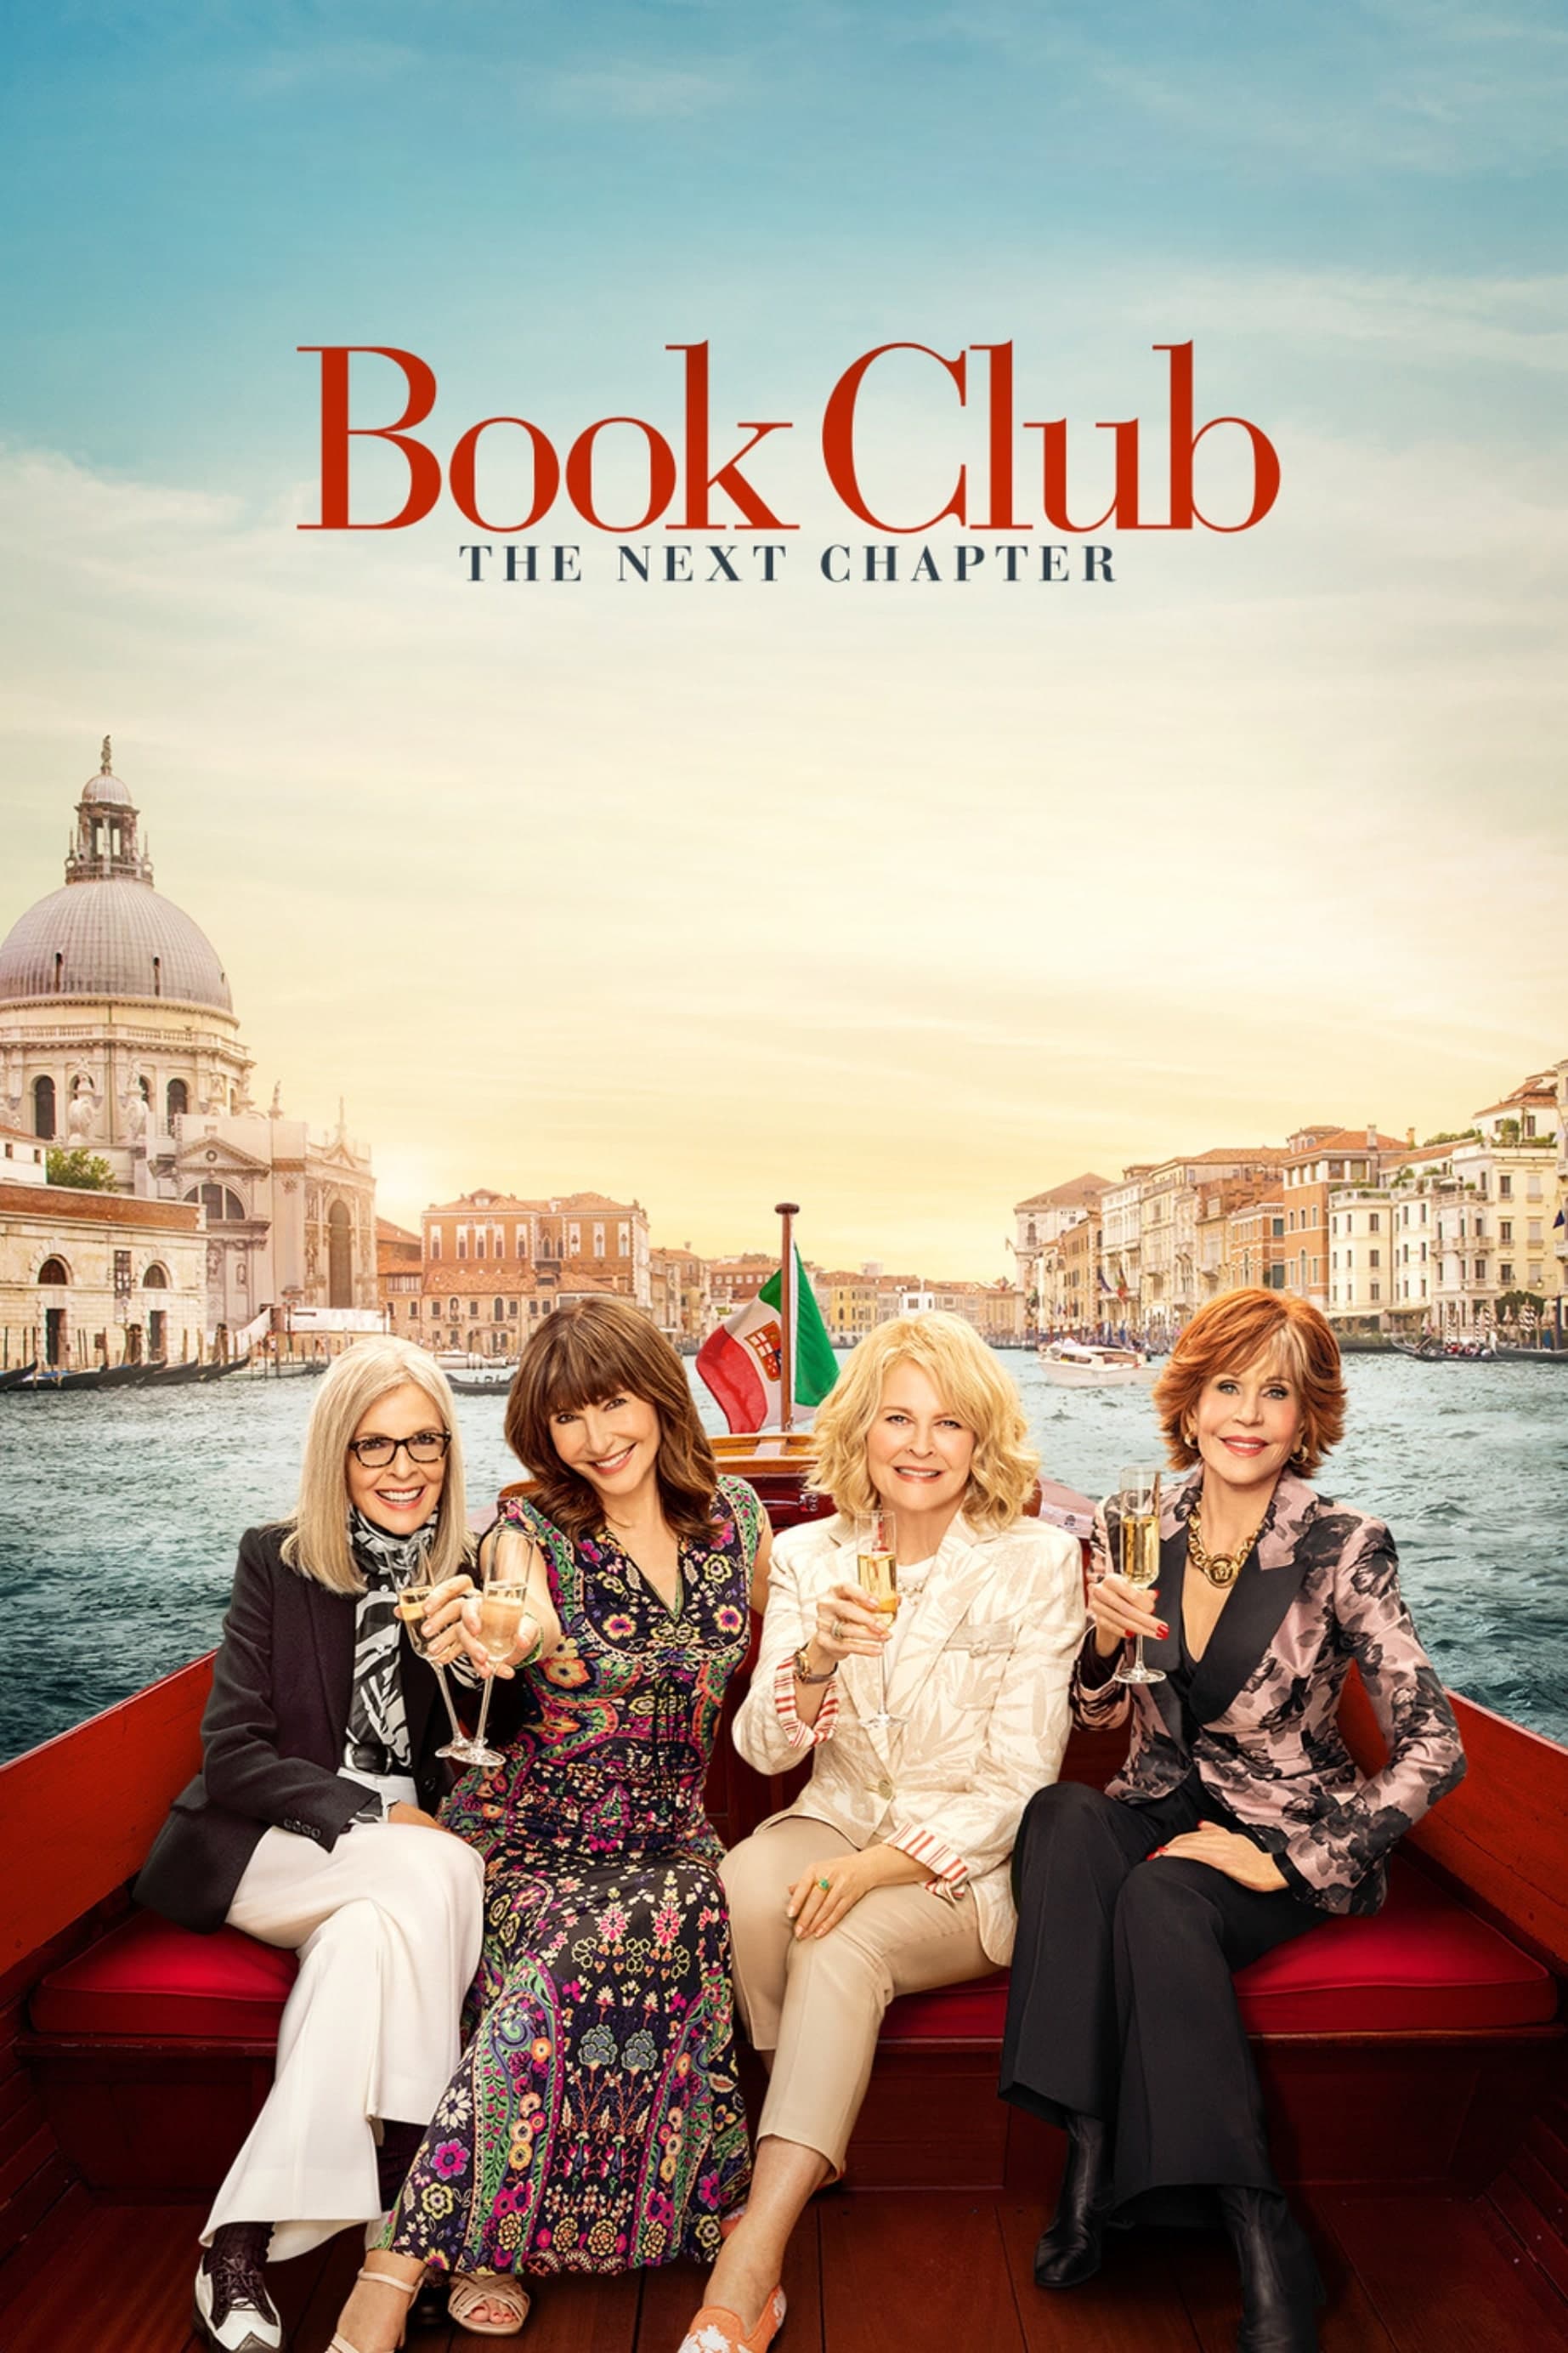 Book Club: The Next Chapter Full Movie